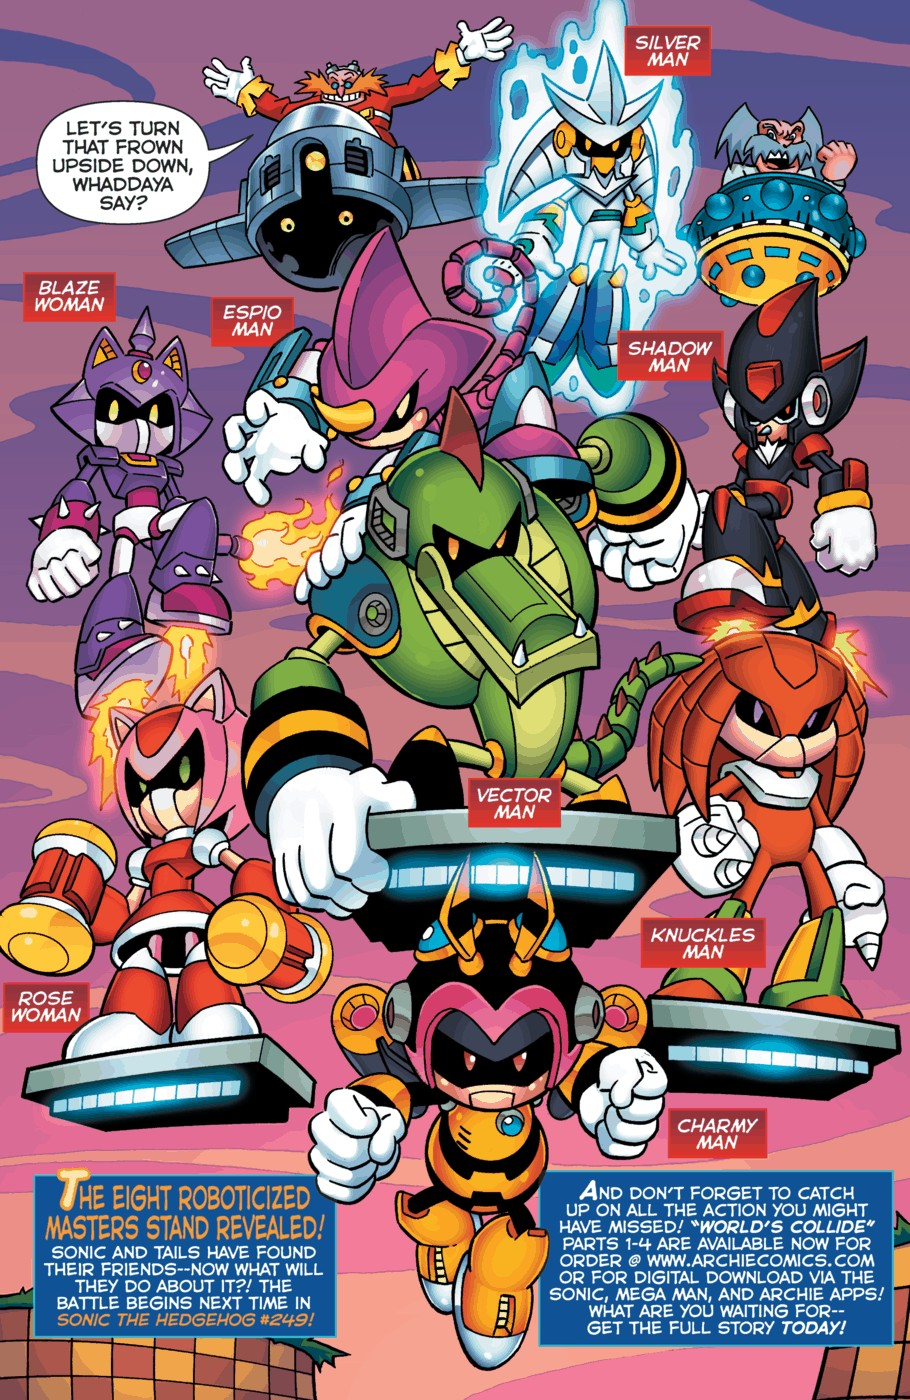 sonic roboticized masters - Let'S Turn Upside Down Whaddaya Shadow Mestor Knuckles He Eight Roboticized Masters Stand Revealed! Sonic And Tale Have Found Thee Friends Or What Wll Lata Flory Toor